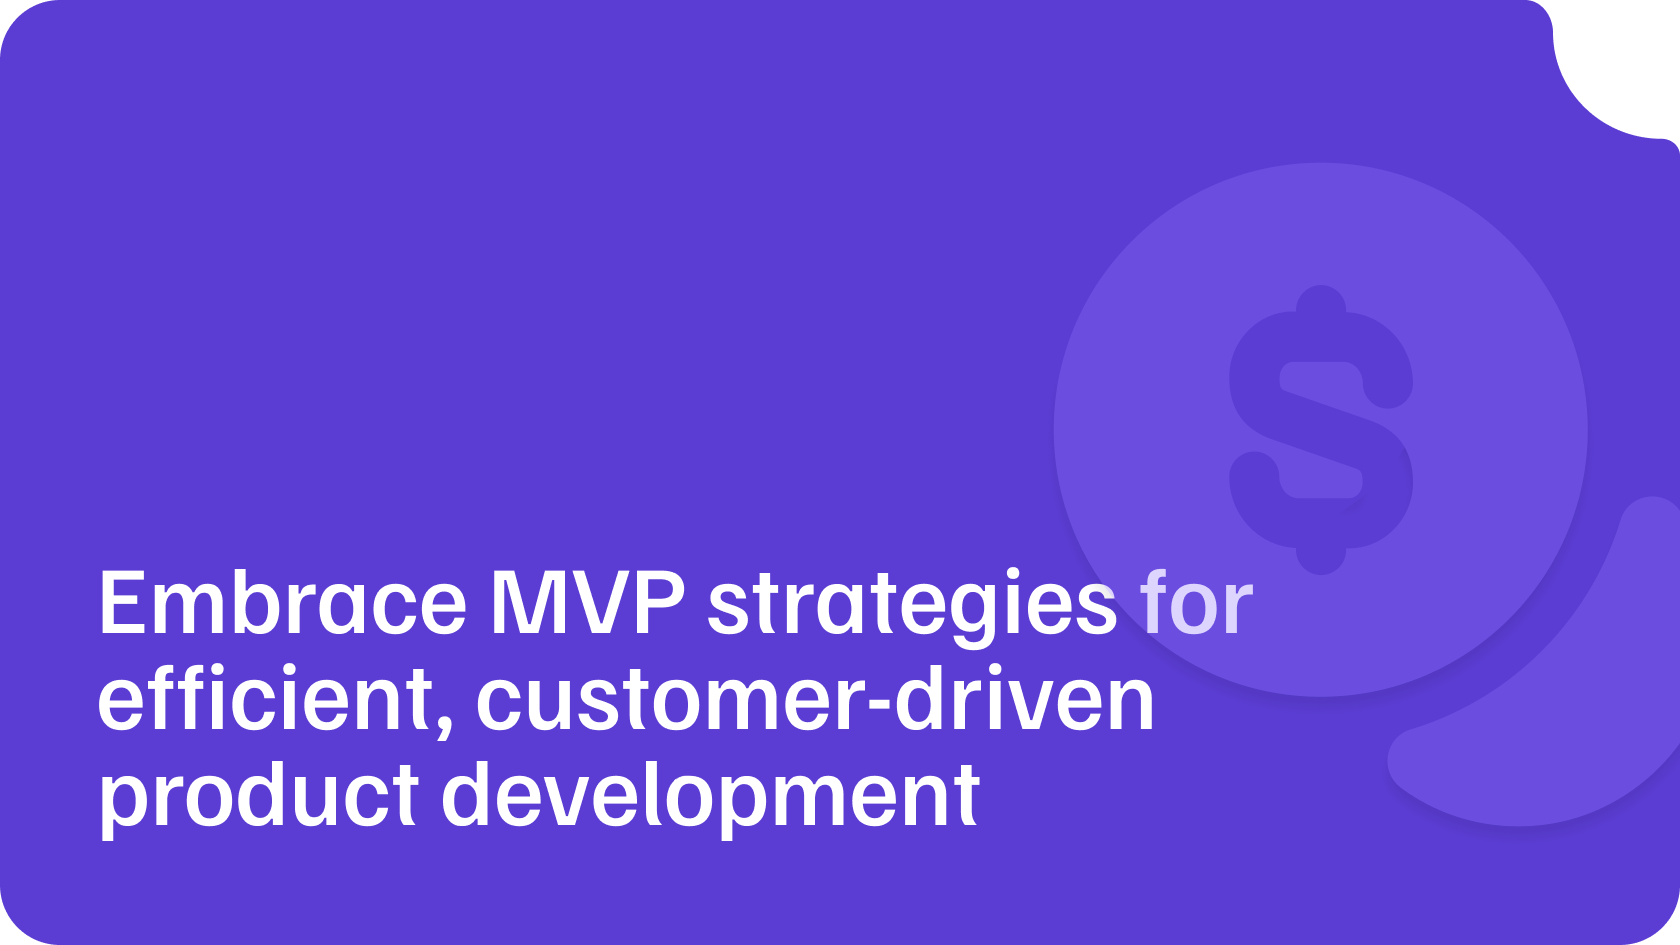 Master MVP development with lean strategies to transform startup ideas into market-ready solutions